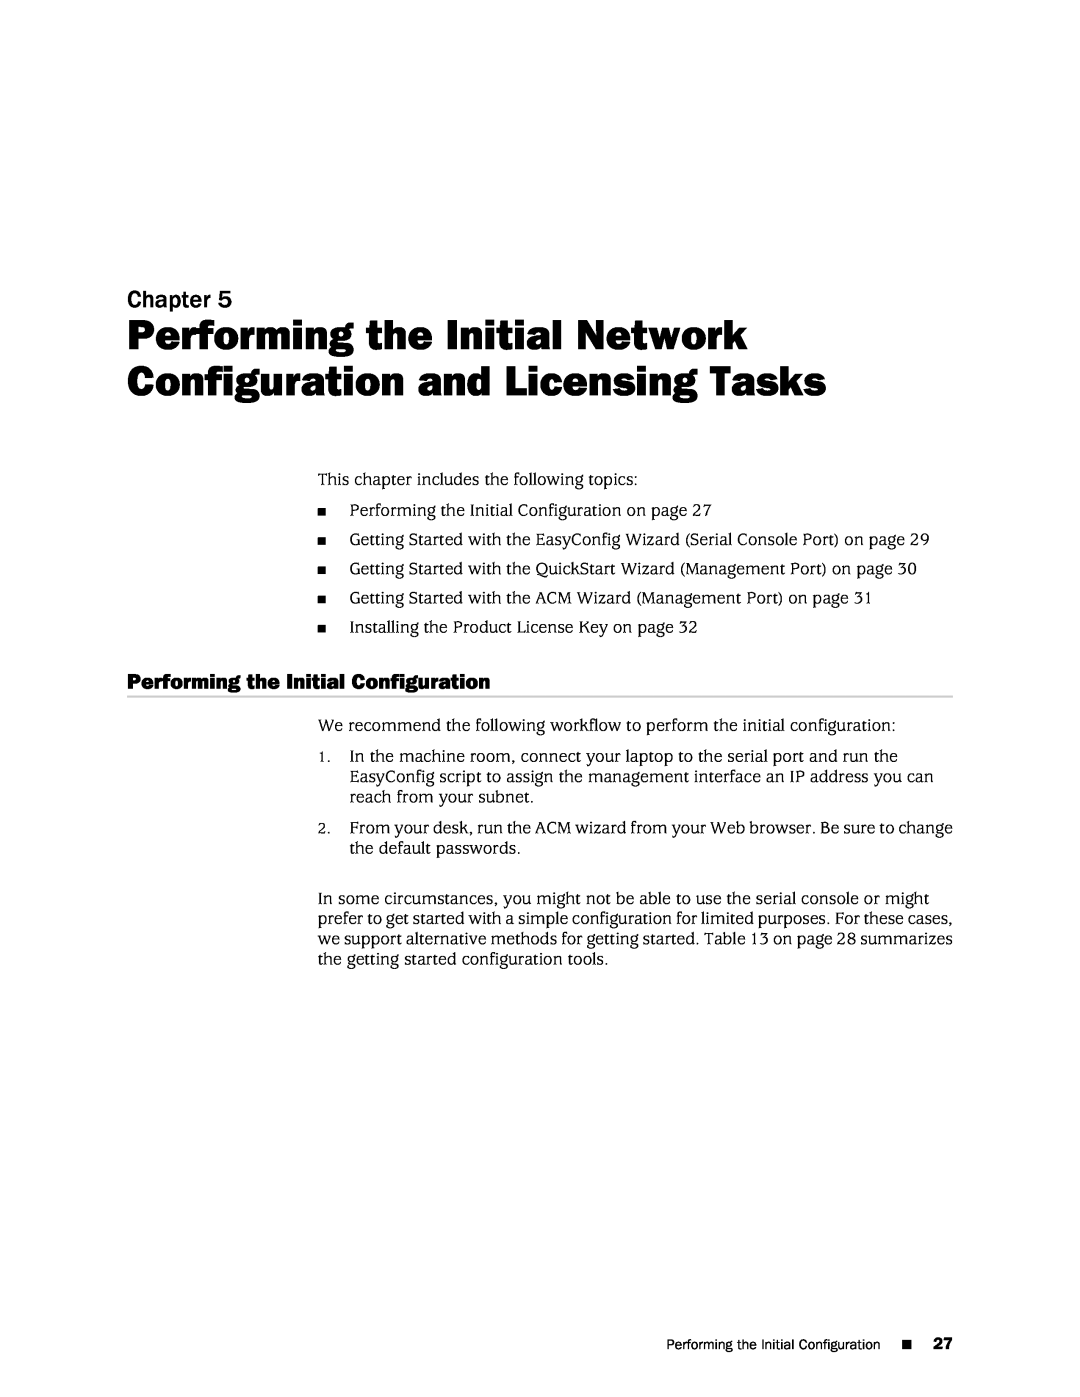 Juniper Networks IDP250 manual Performing the Initial Configuration, Chapter 